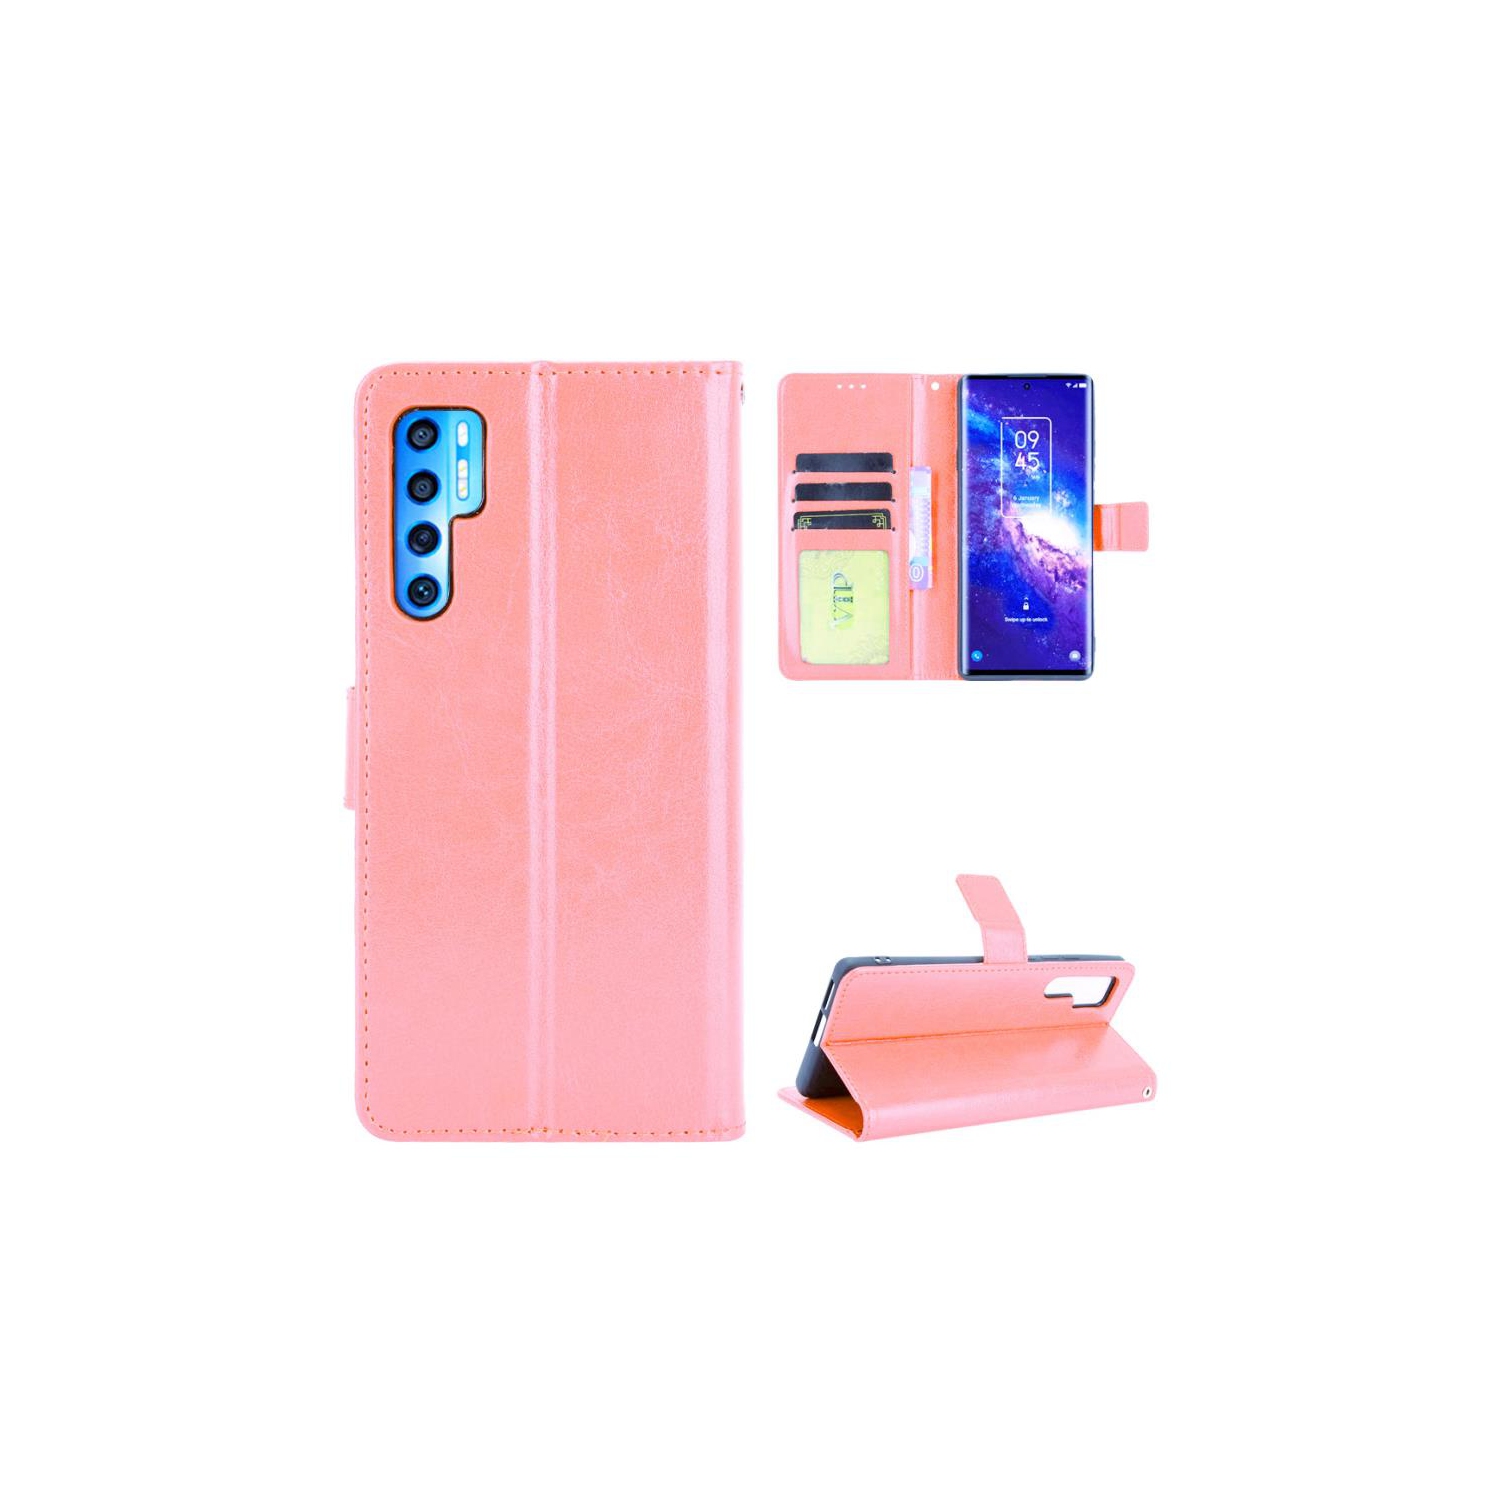 【CSmart】 Magnetic Card Slot Leather Folio Wallet Flip Case Cover for TCL 20 Pro 5G, Rose Gold